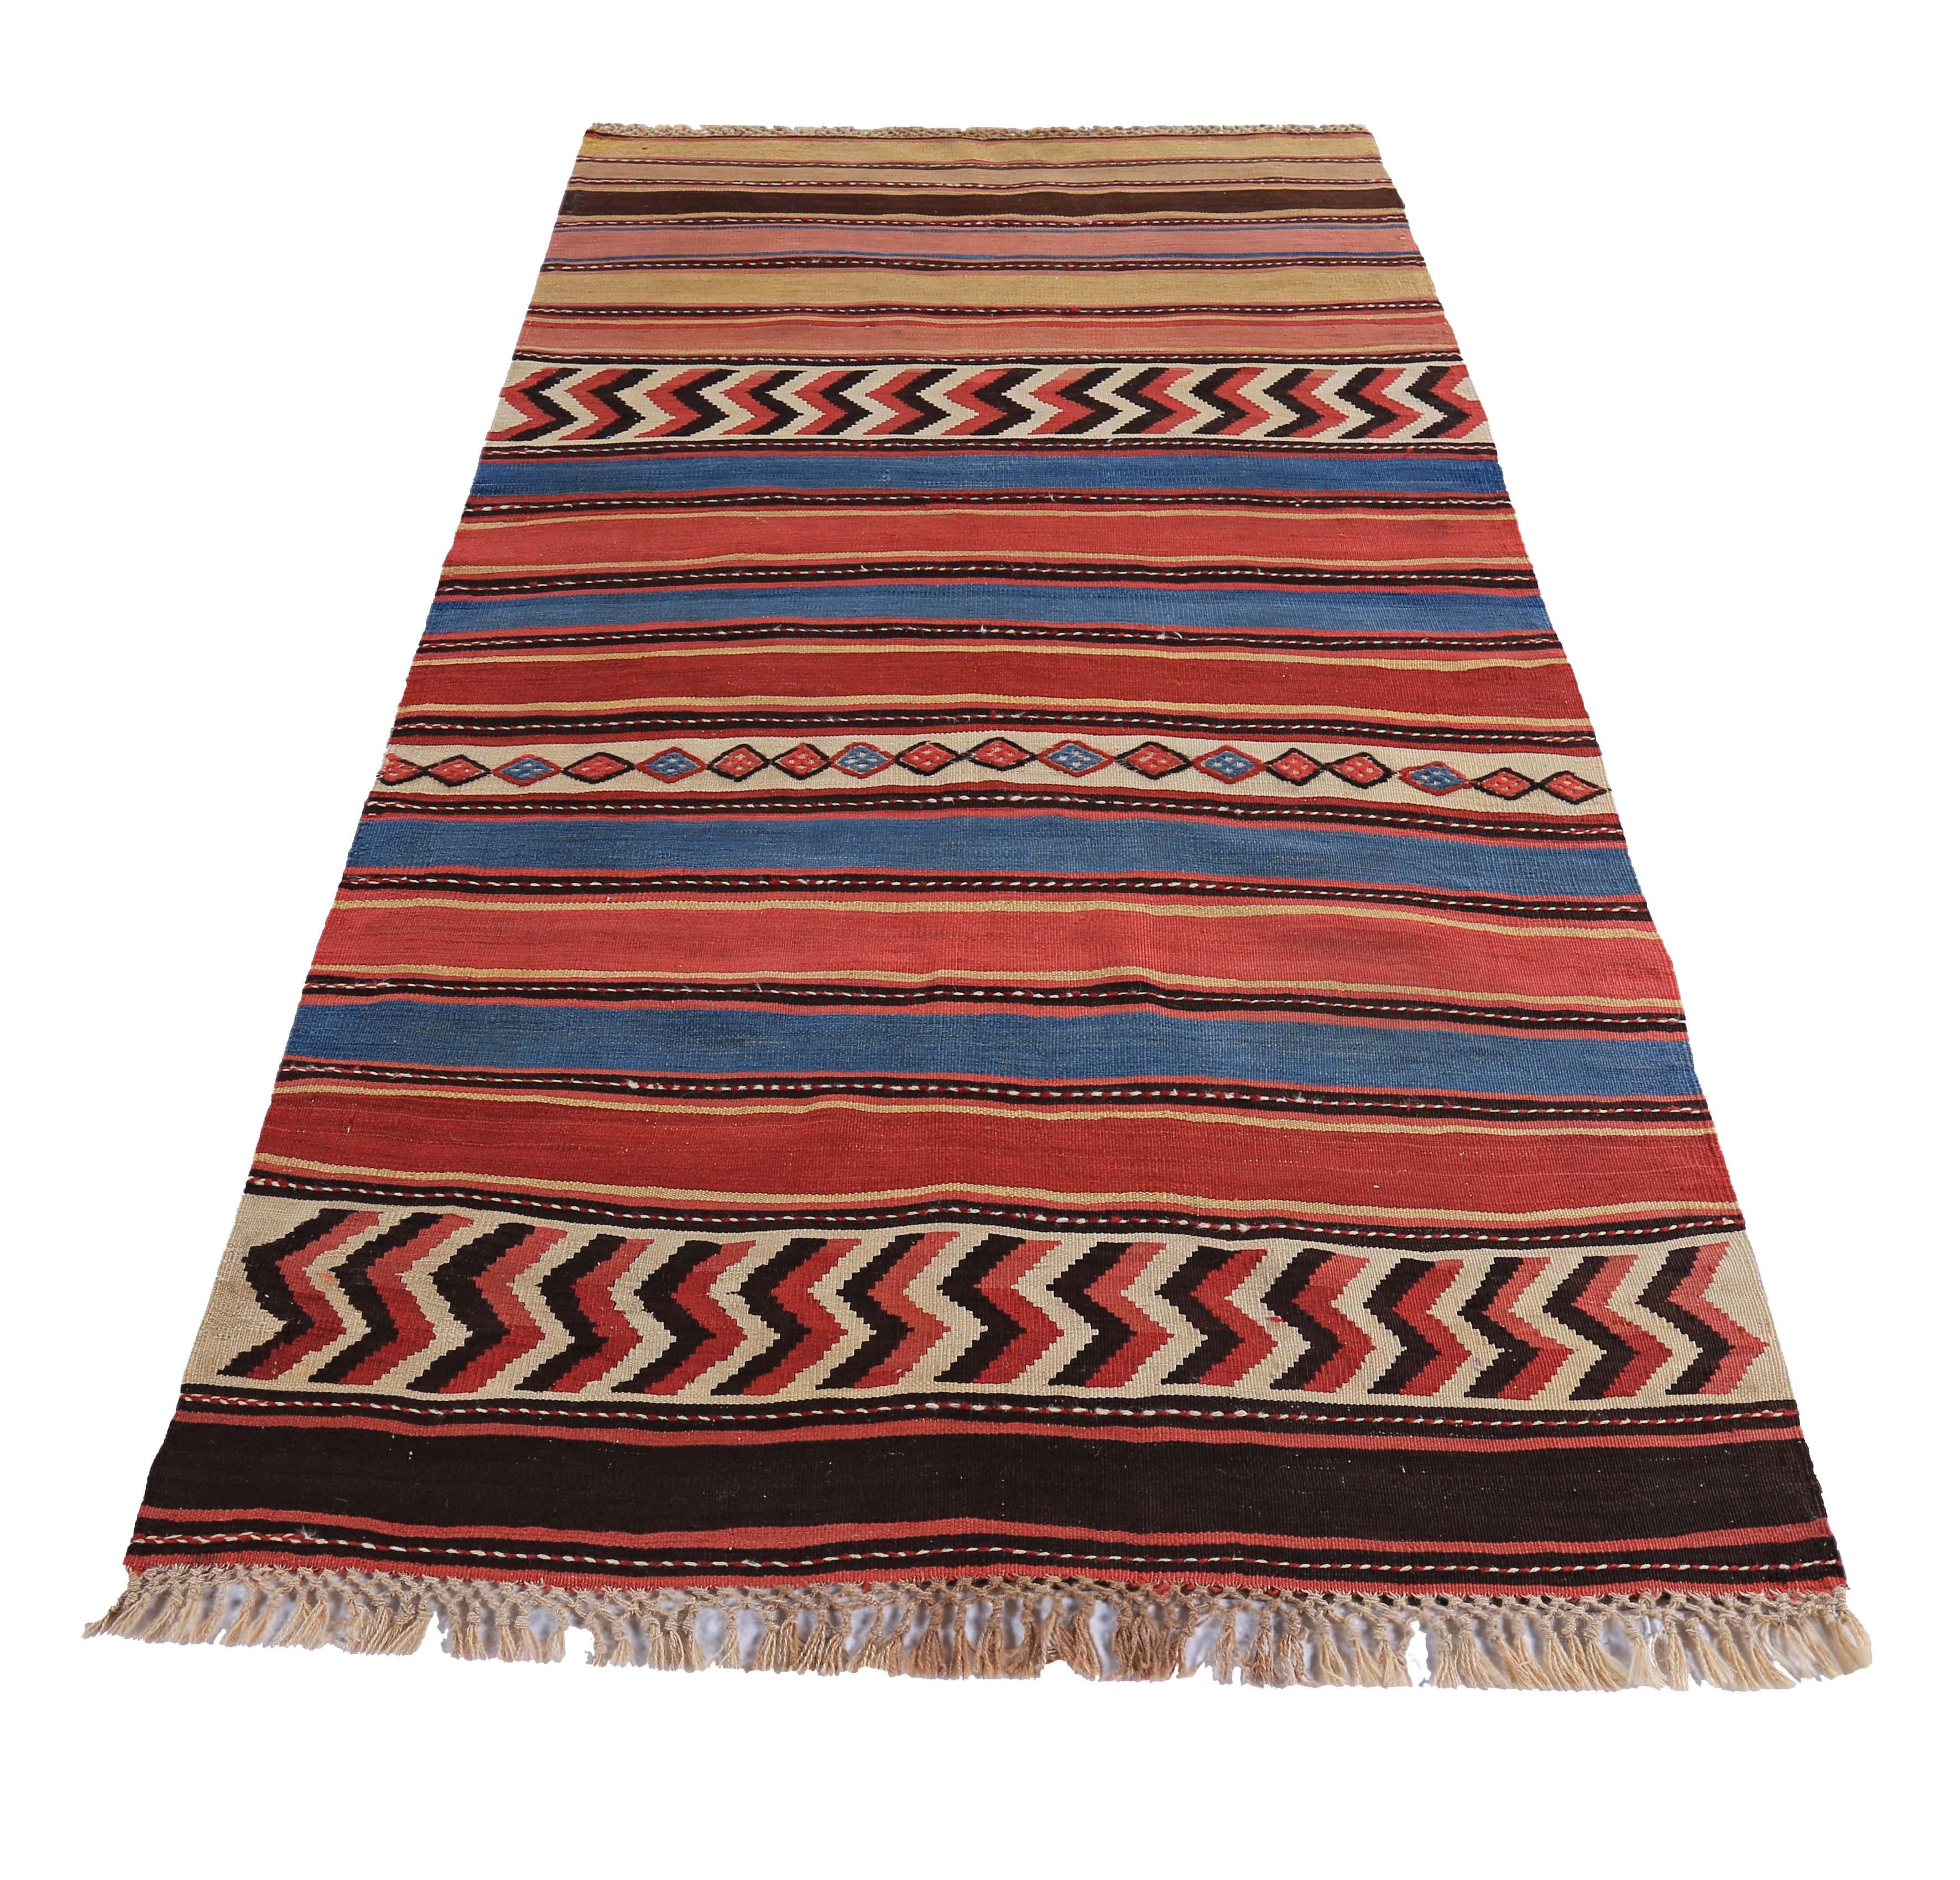 Turkish rug handwoven from the finest sheep’s wool and colored with all-natural vegetable dyes that are safe for humans and pets. It’s a traditional Kilim flat-weave design featuring red and blue tribal design patterns on a beige field. It’s a